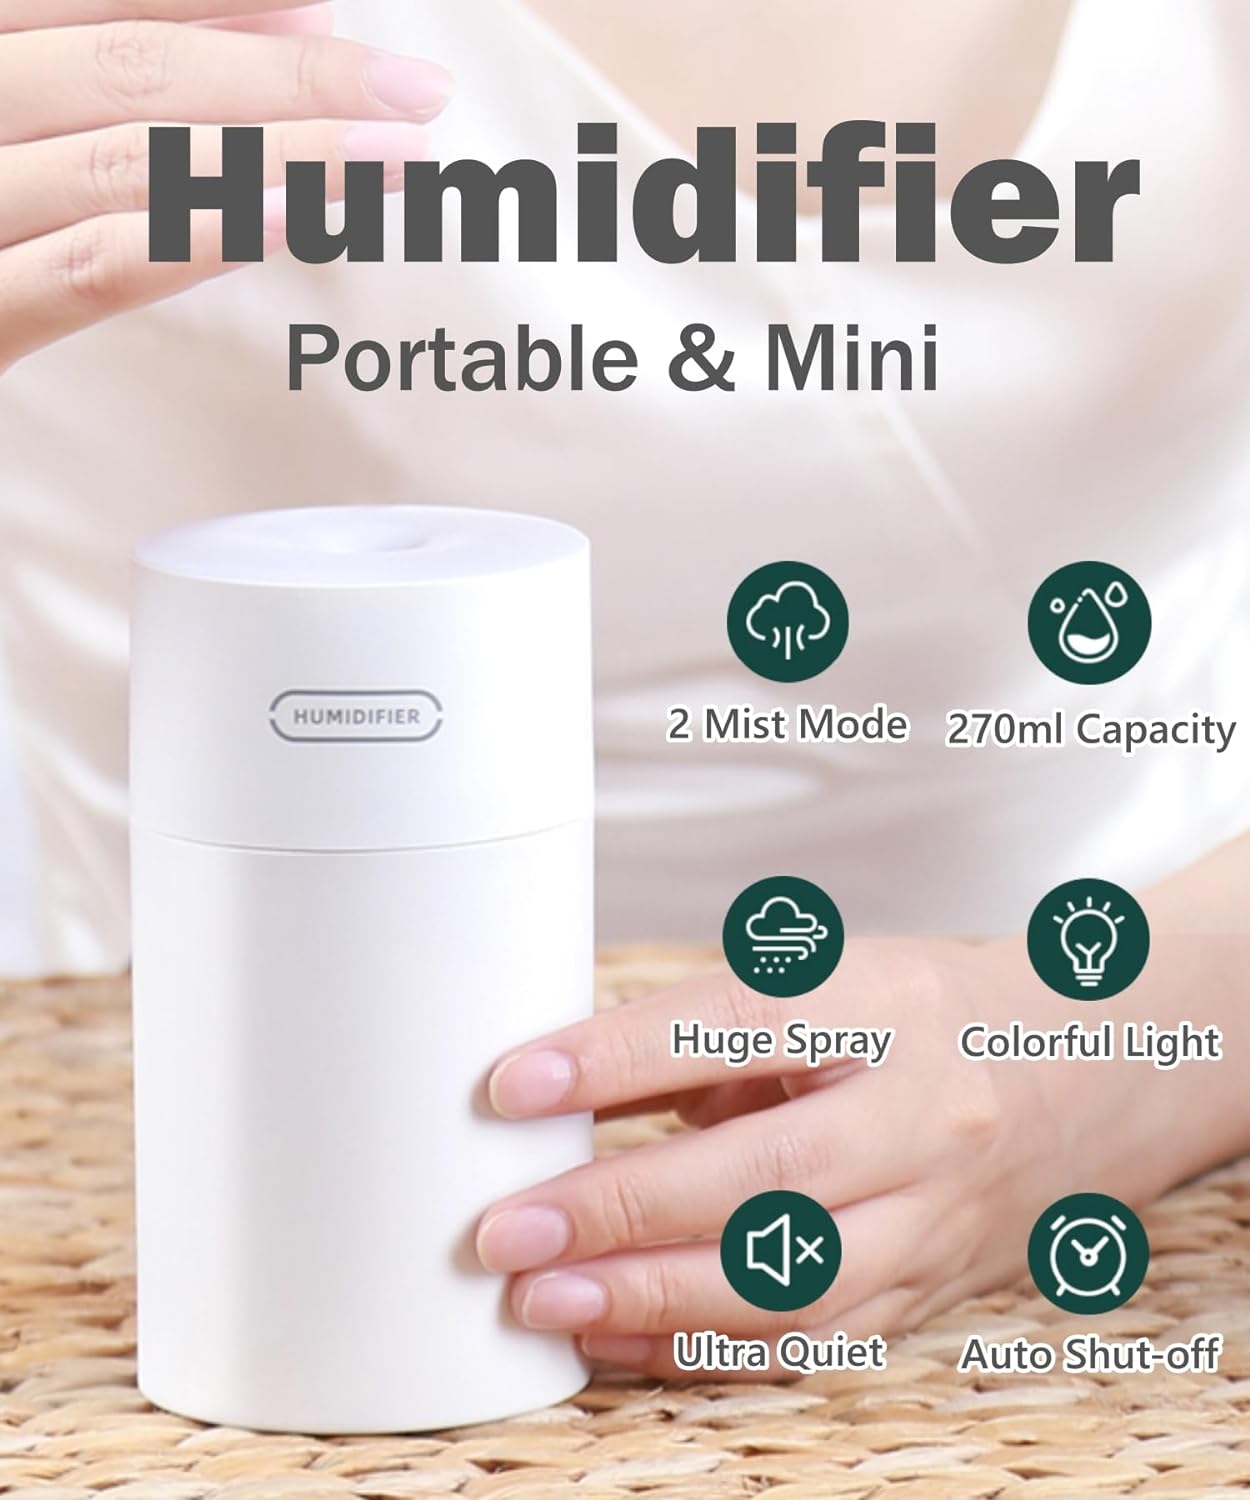 Mini Humidifier, Small Personal Cool Mist Humidifiers with Colorful Light, USB Powered, 2 Spray Modes, Auto Shut-Off, Ultra-Quiet Portable Air Humidifier for Women Kids Bedroom Office Desk (Grey)